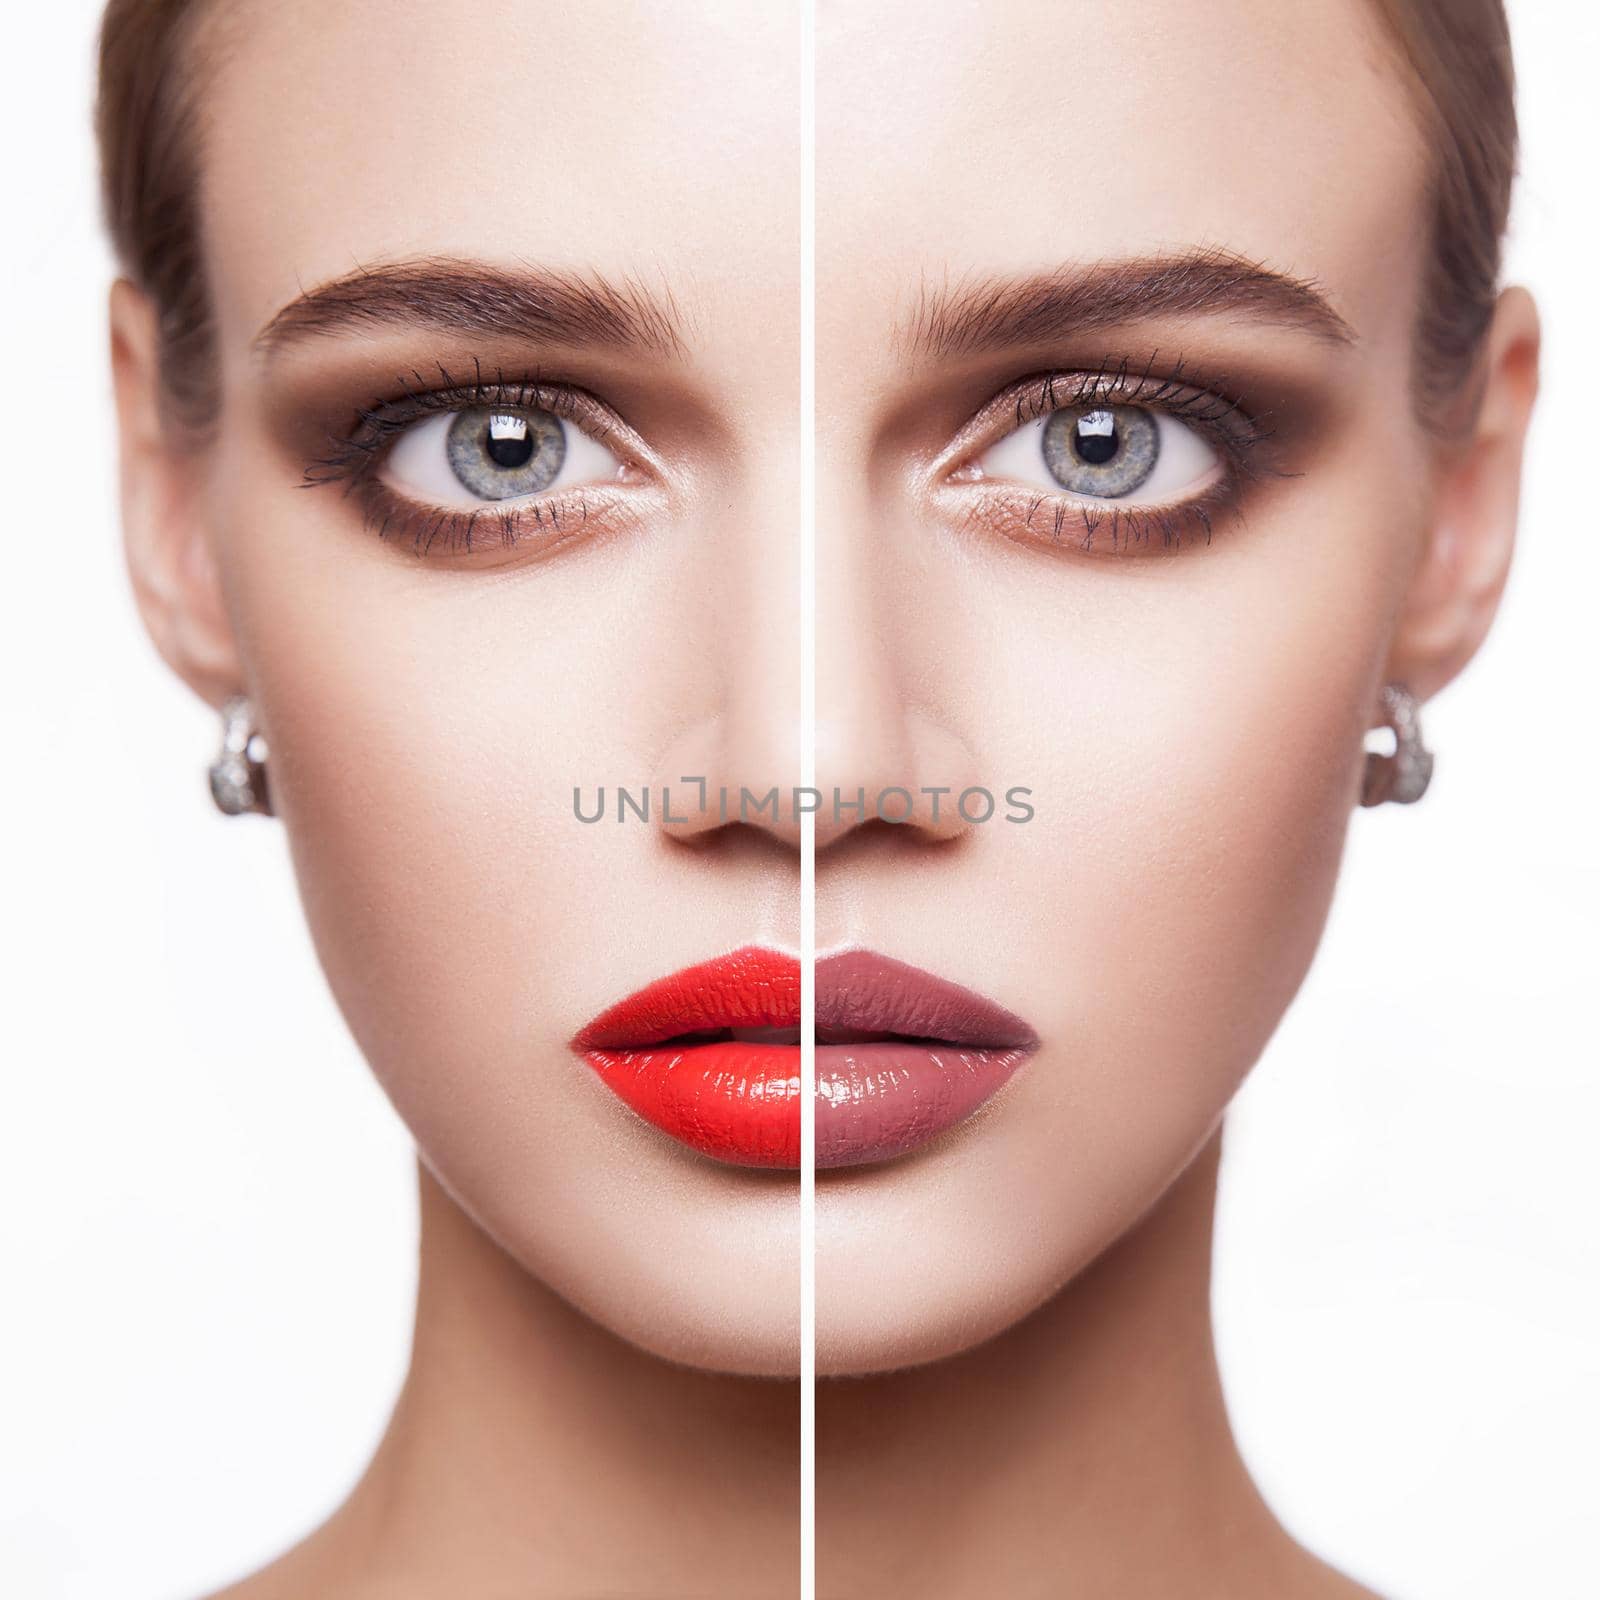 Portrait of young woman with makeup and different lips color. indoor isolated on white background.